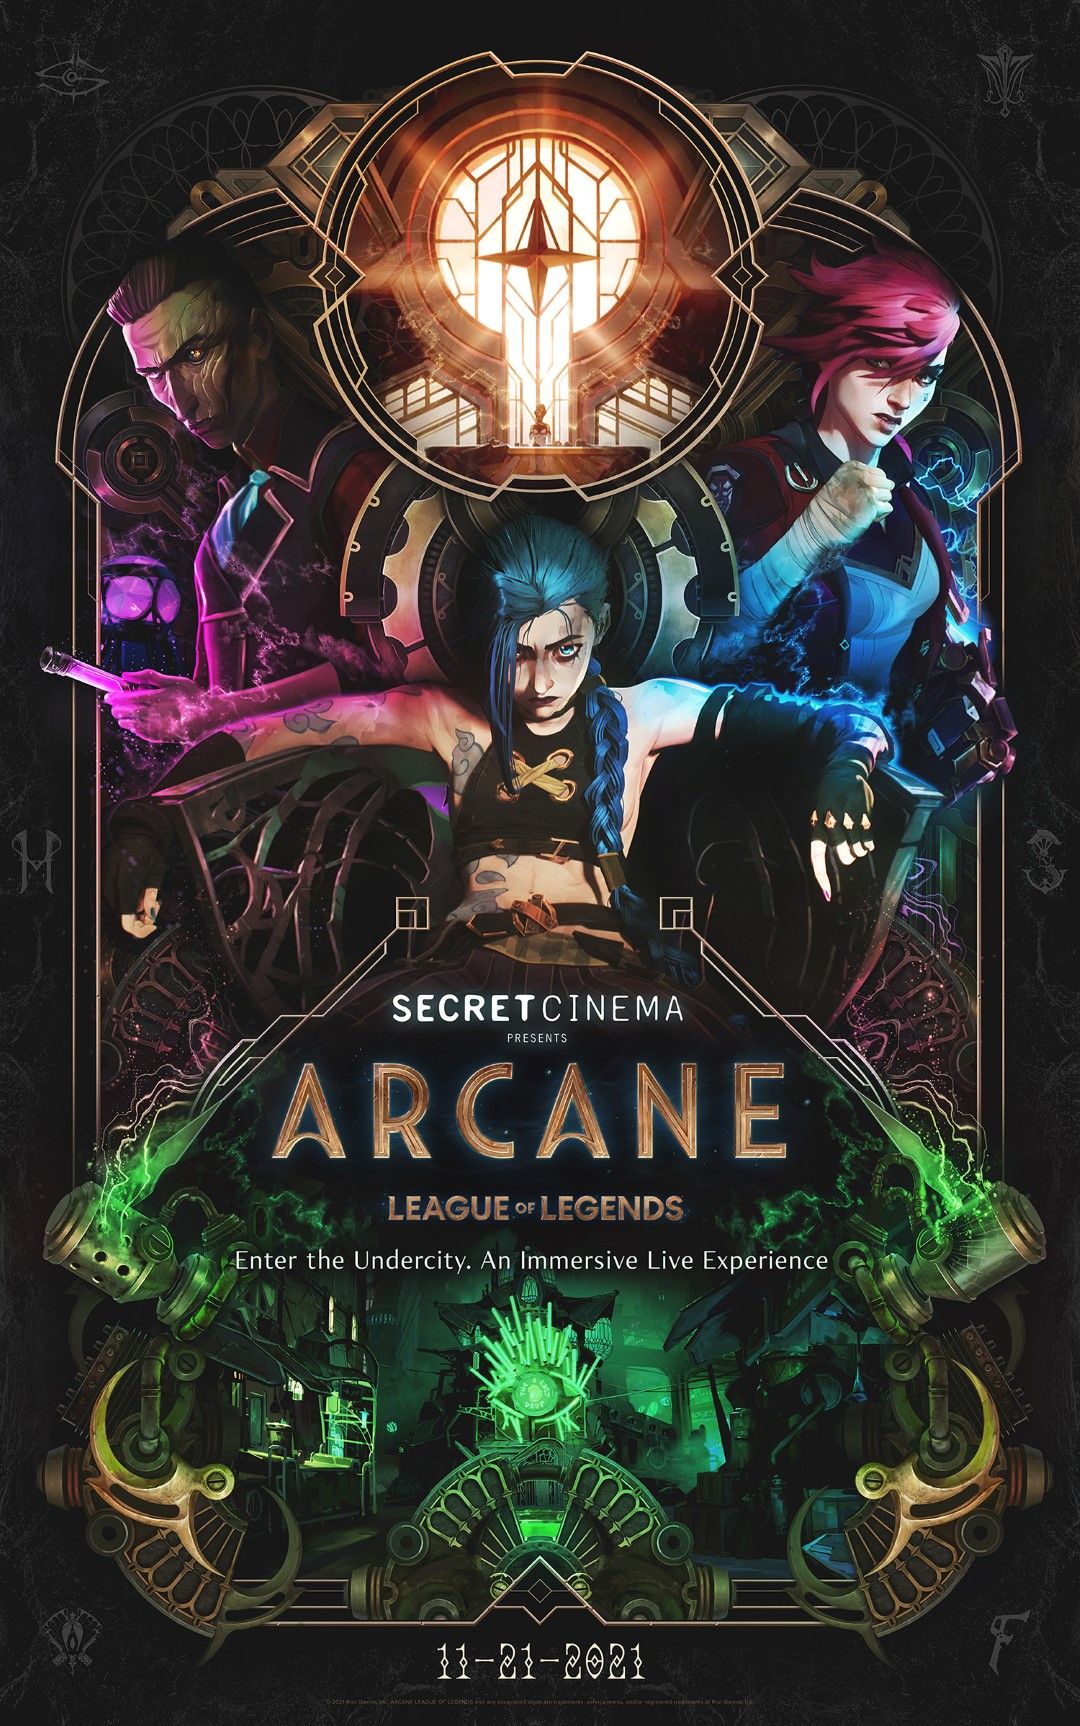 League of Legends' Arcane Immersive Experience Coming to Los Angeles